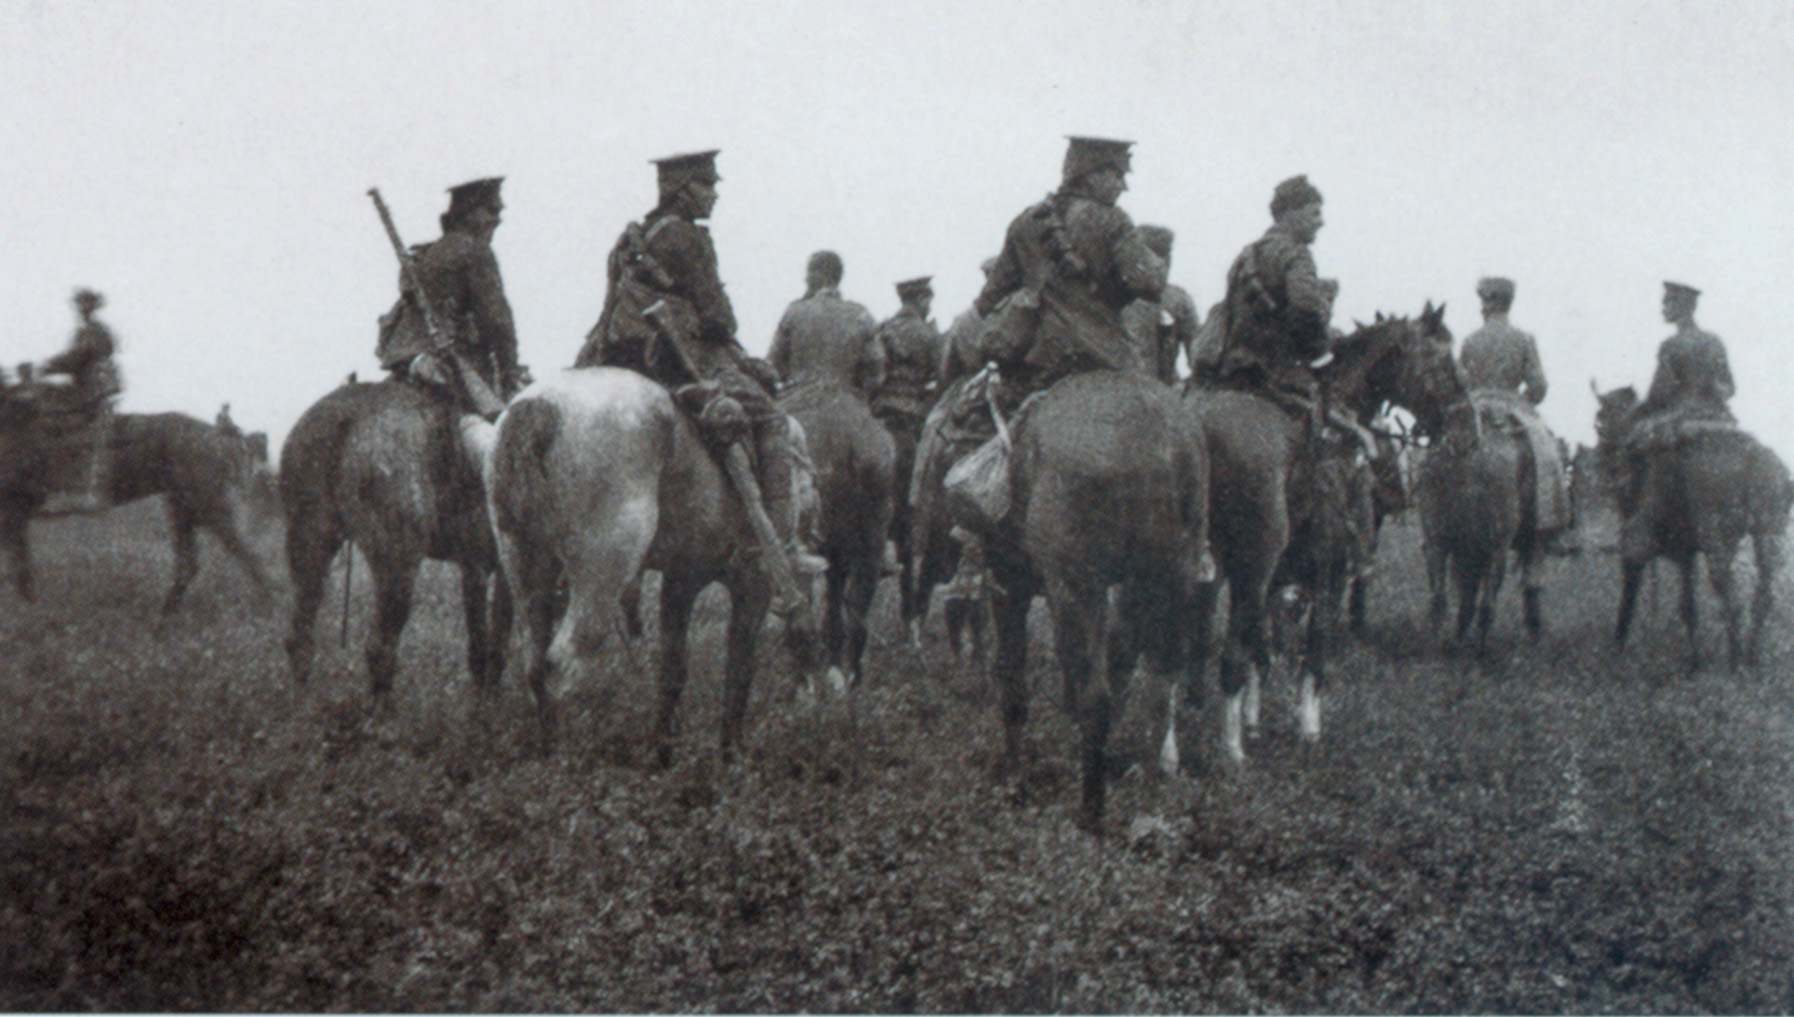 British cavalrymen of the 2nd Dragoon Guards (Queens Bays) surround a group of German prisoners in 1914.